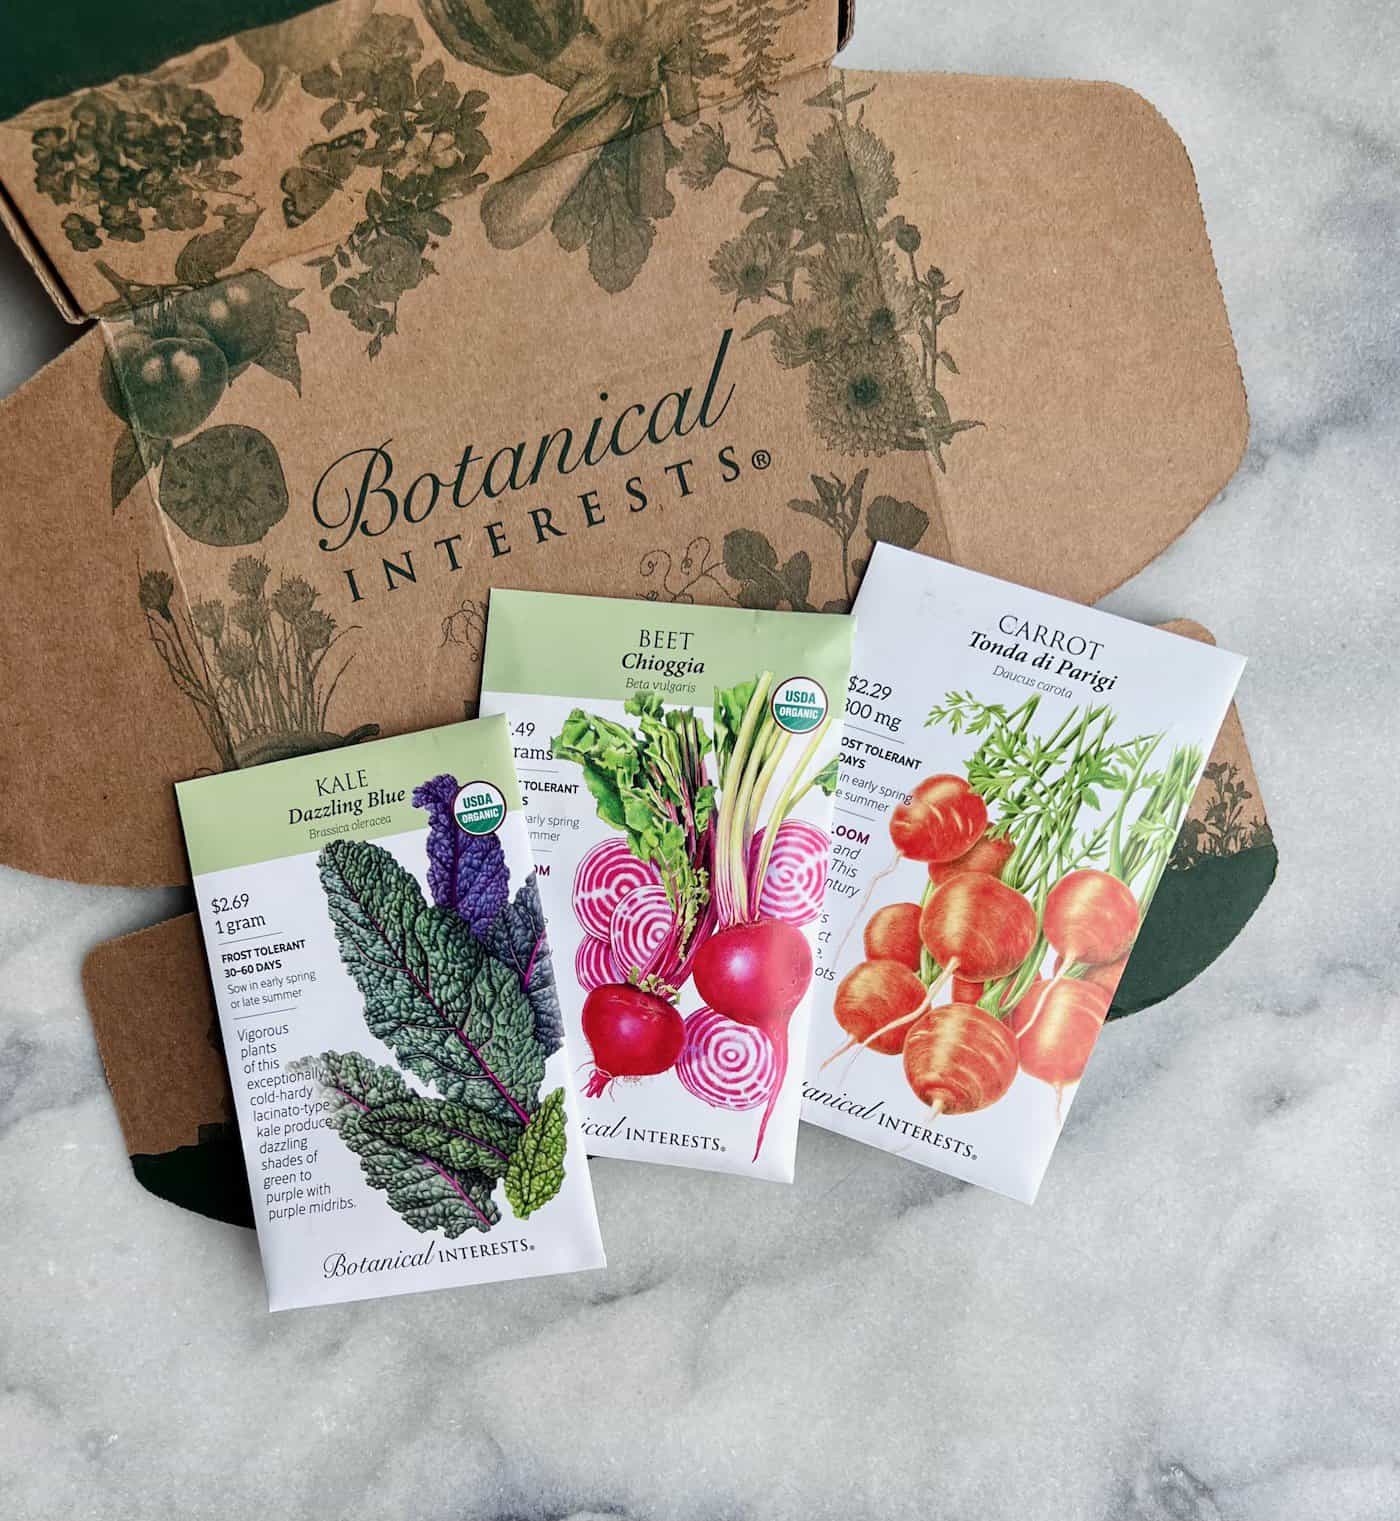 Ordering seeds online - mail delivery of box of seeds